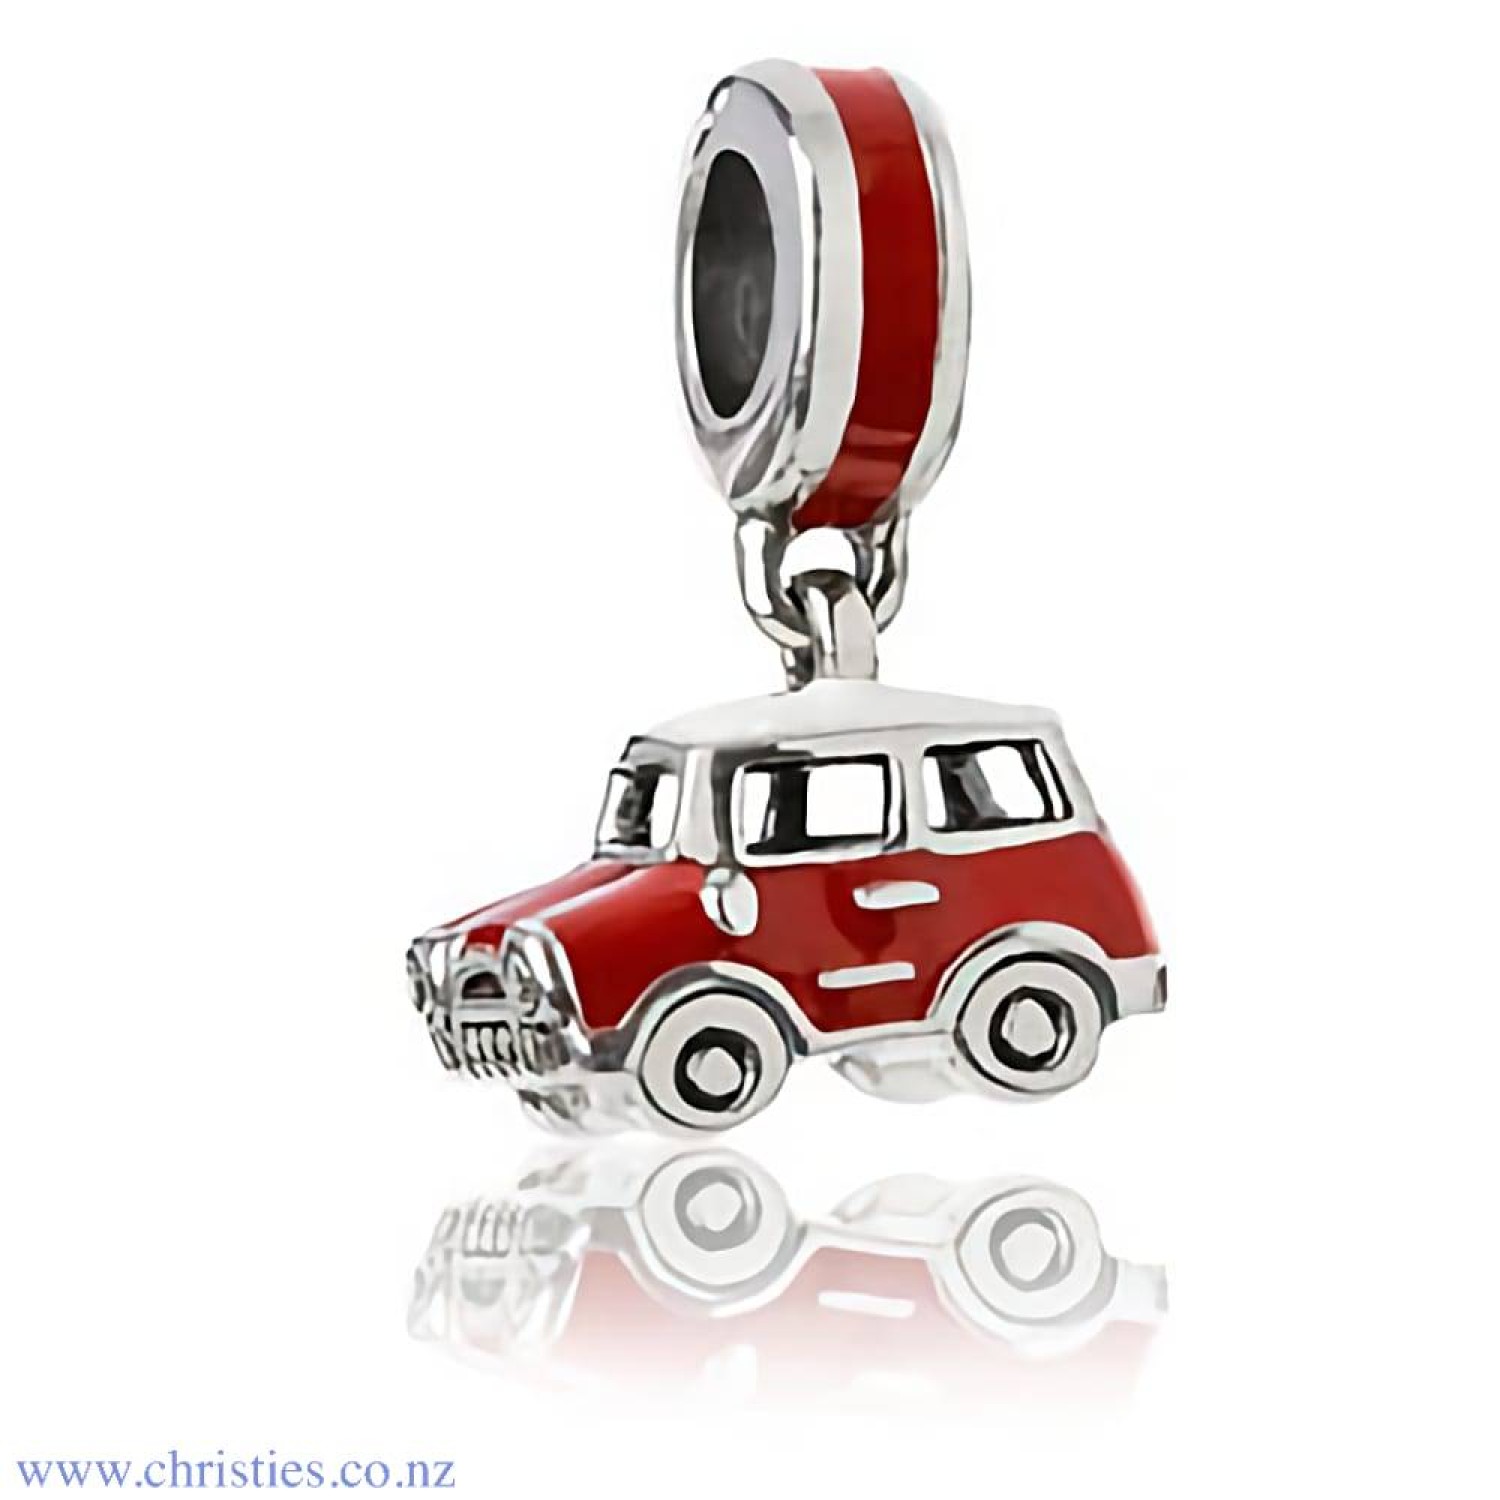 LKD044 Evolve Jewellery Retro Mini Cooper Charm. Music playing, singing along with the windows down, wind in your hair and only the meandering open roads of New Zealand in front of you. Our beautiful Retro Mini Cooper charm represents a classic kiwi road 